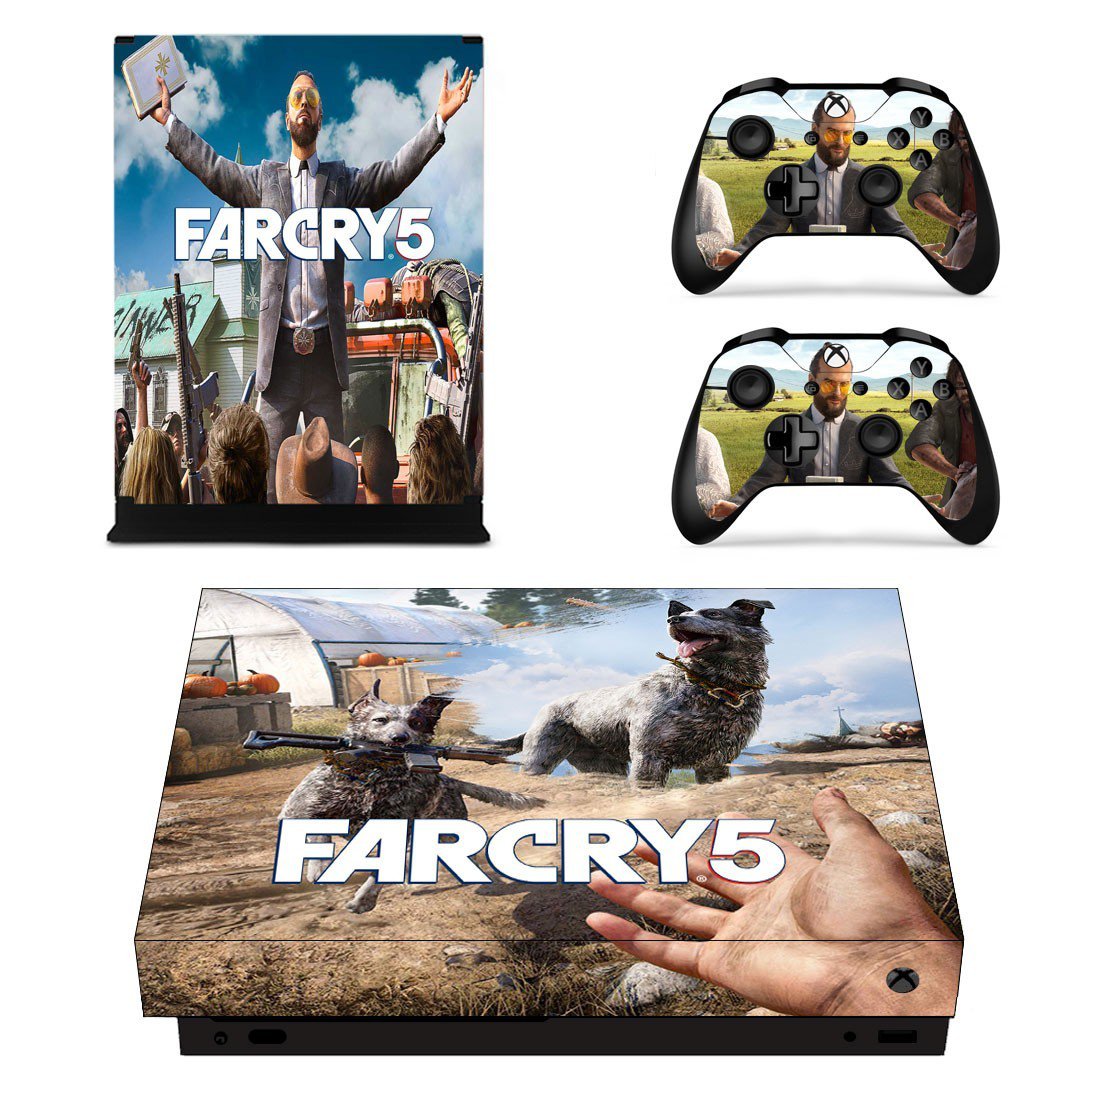 Far Cry 5 for Xbox One X and Controllers Skin Sticker